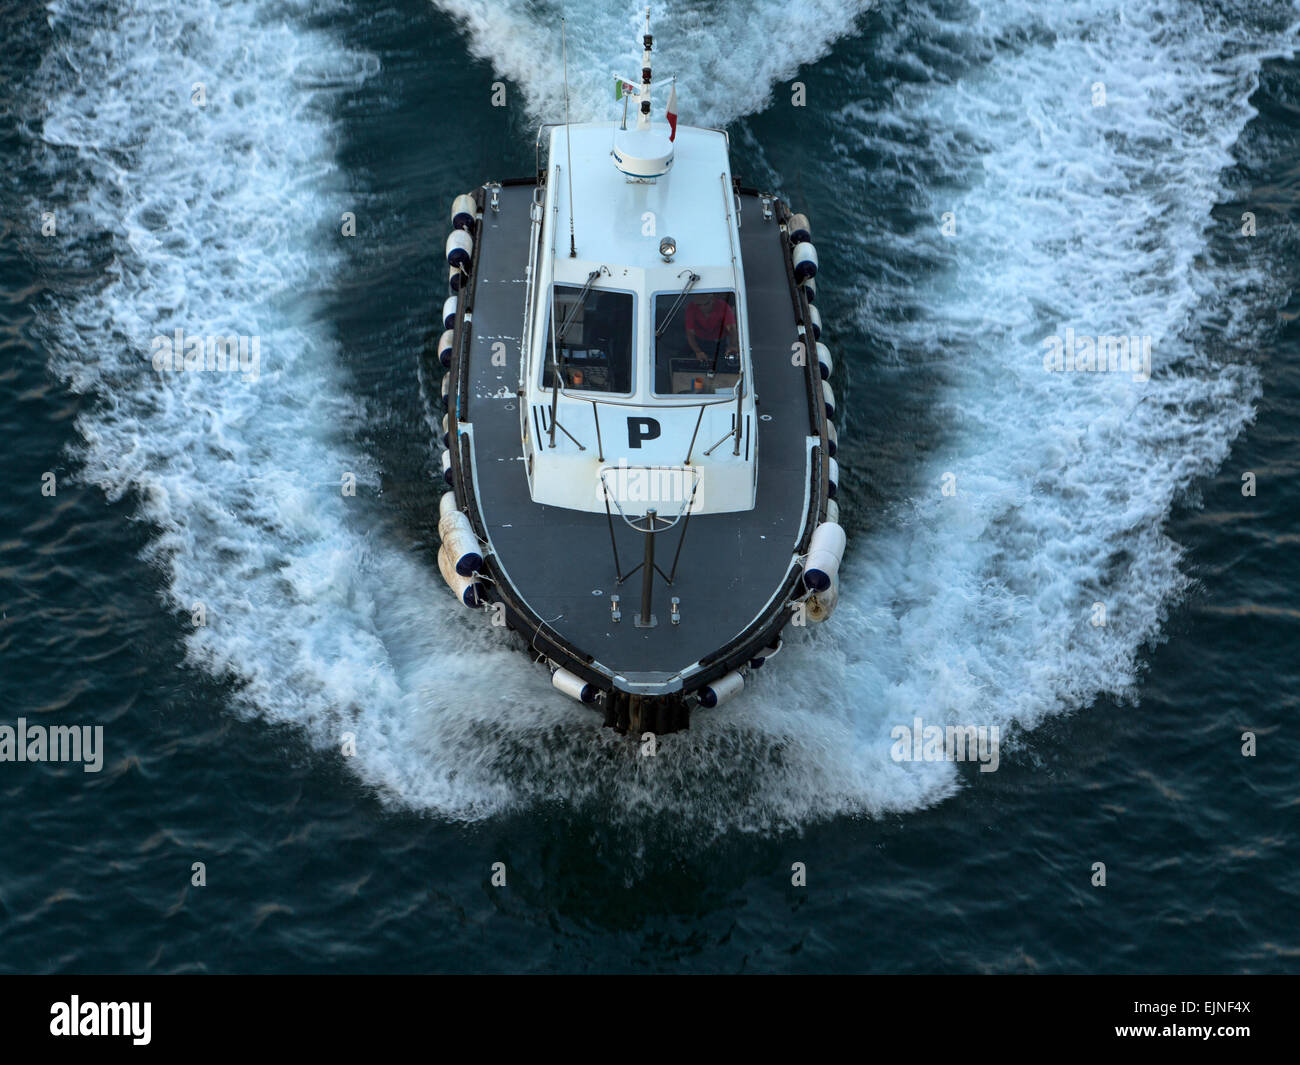 Civitavecchia, Rome Italy pilot safety boat from above Stock Photo